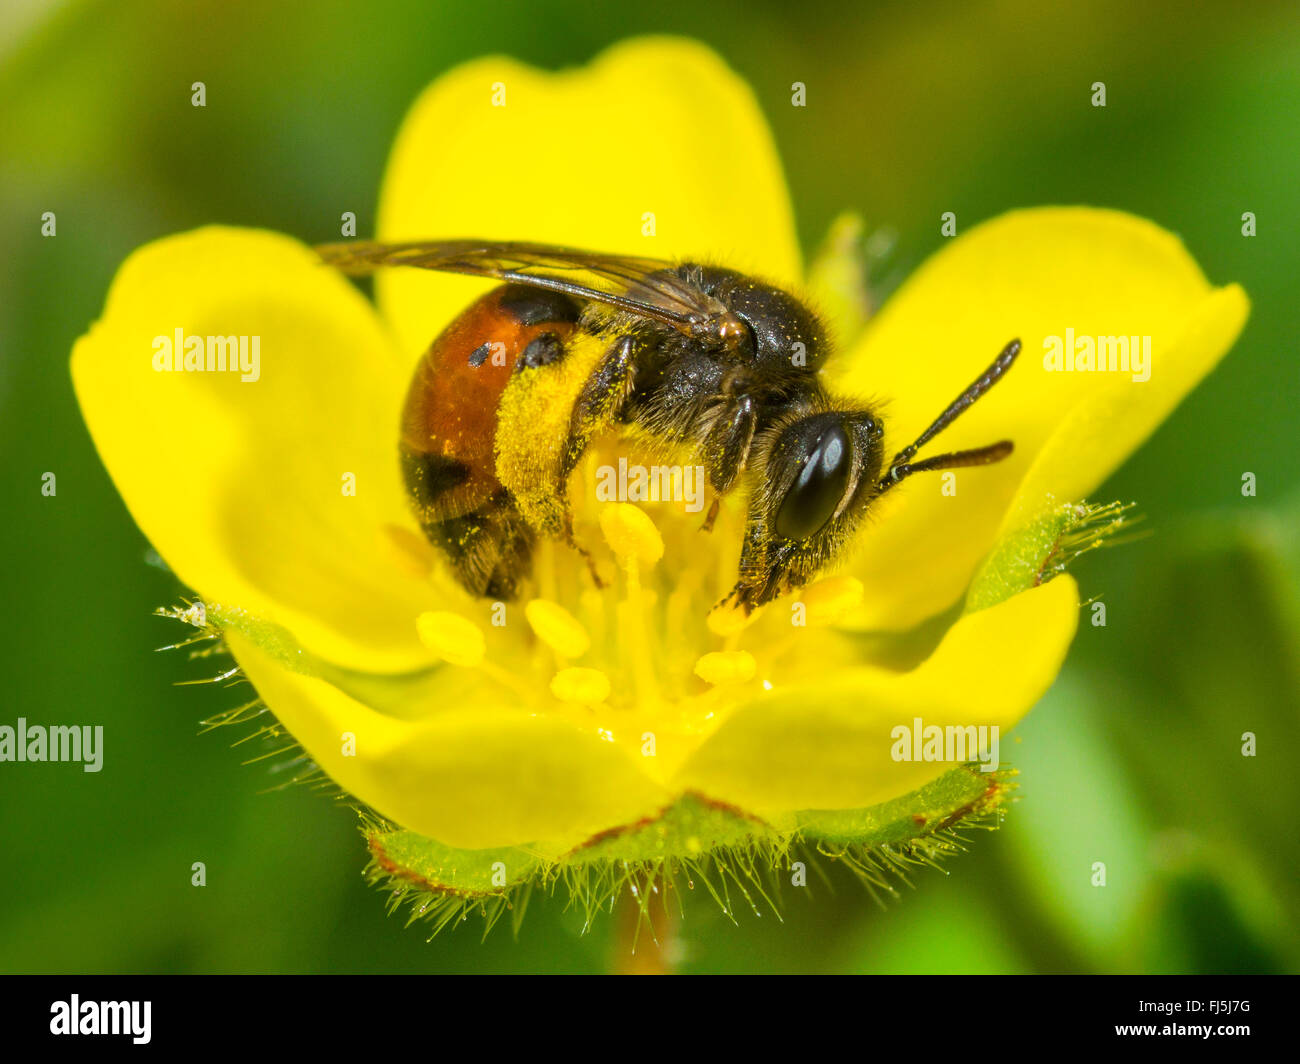 mining bee (Andrena potentillae), Female foraging on the flower of Potentilla arenaria, Germany Stock Photo